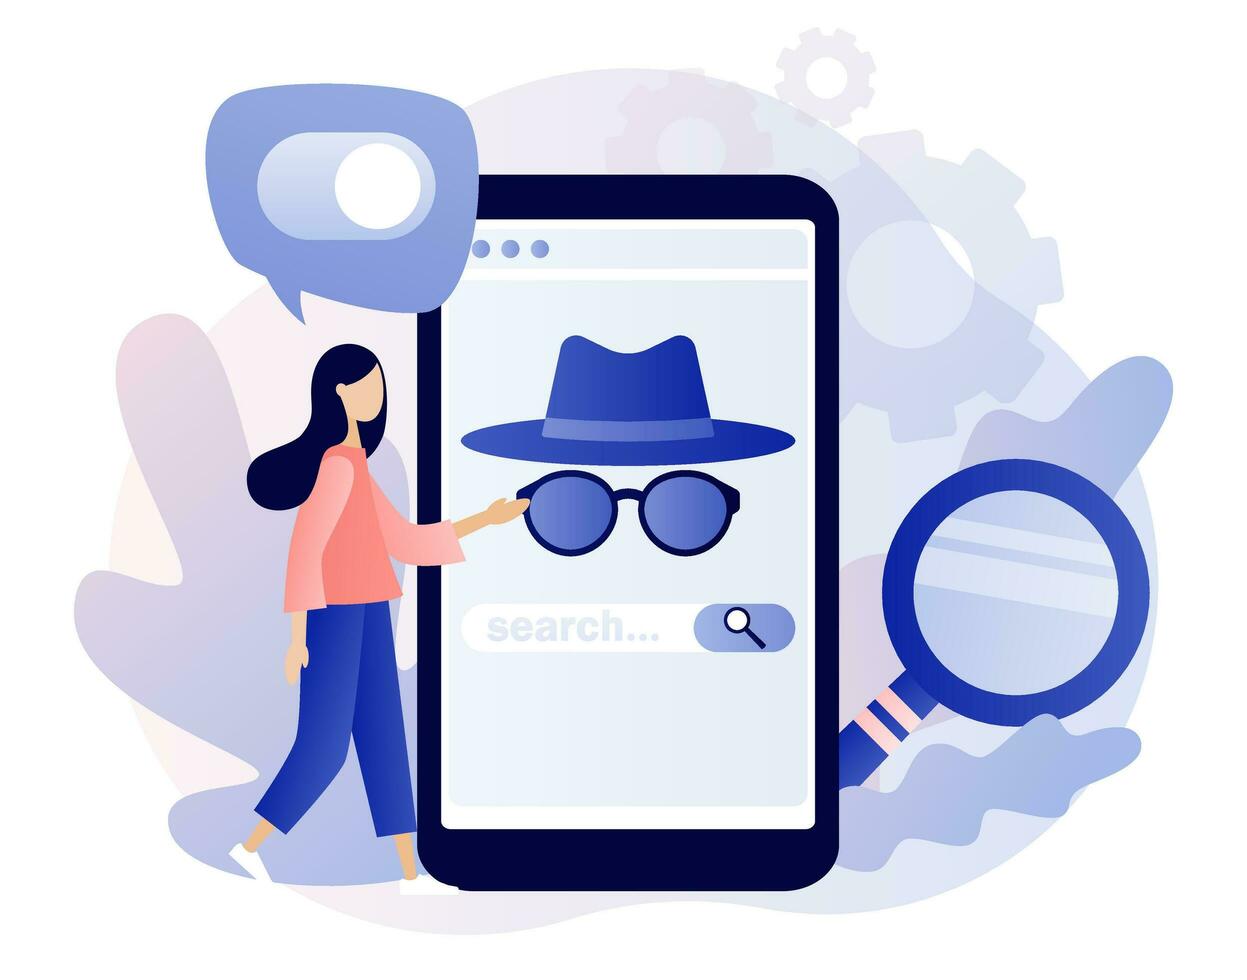 Incognito mode concept. Browse in private. Anonymous search in smartphone app. Online privacy and personal data protection. Confidential information. Modern flat cartoon style. Vector illustration